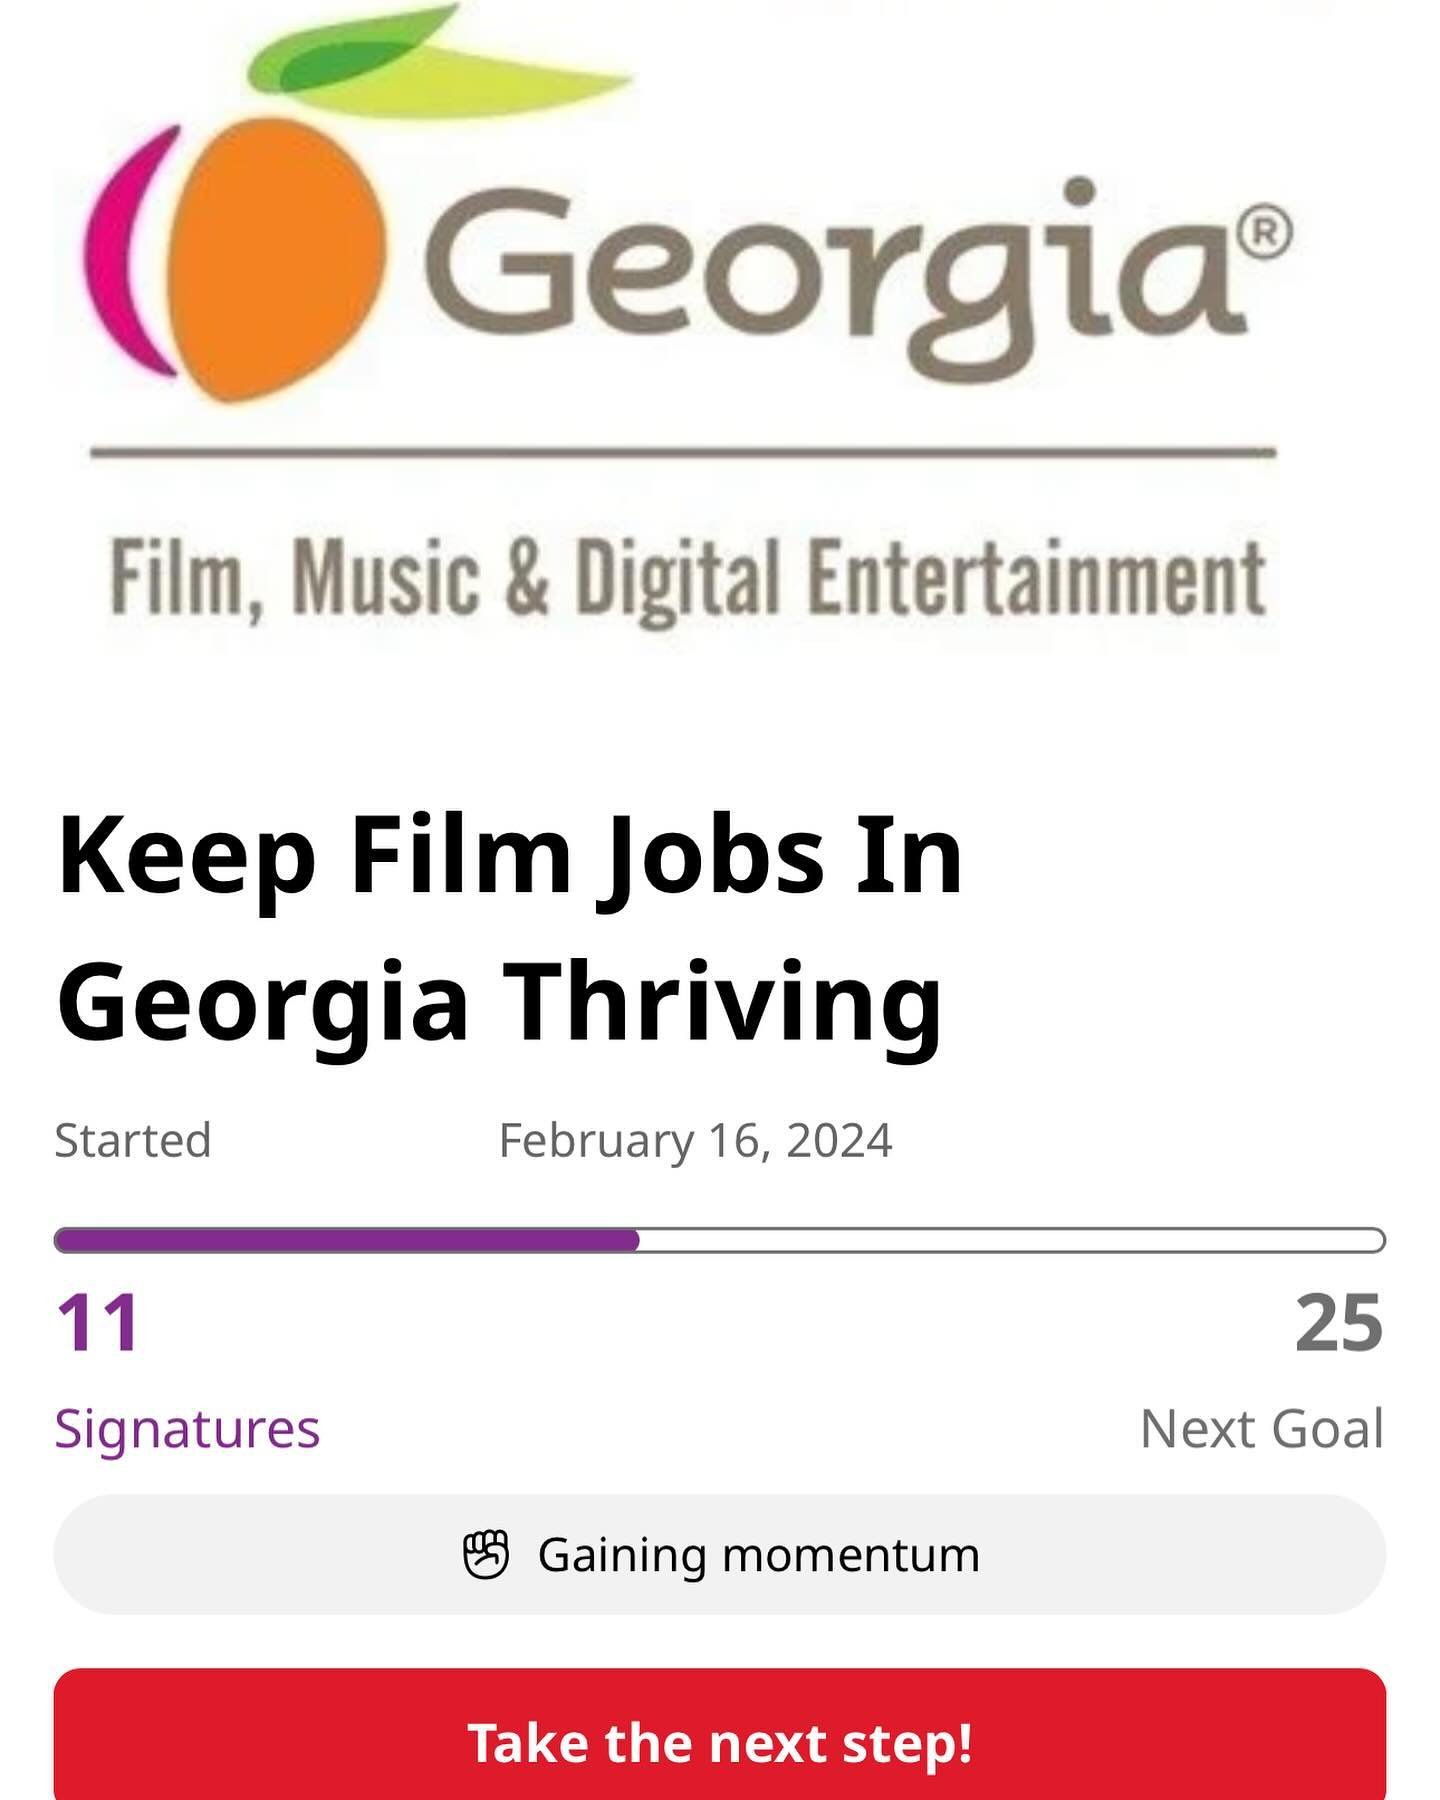 Hey guys! This is a petition to help keep film jobs in GA thriving. 

House Bill 1180 threatens the structure and security of the film industry in GA. The bill would raise the minimum spend requirement to qualify for FILM tax incentives from $500,000